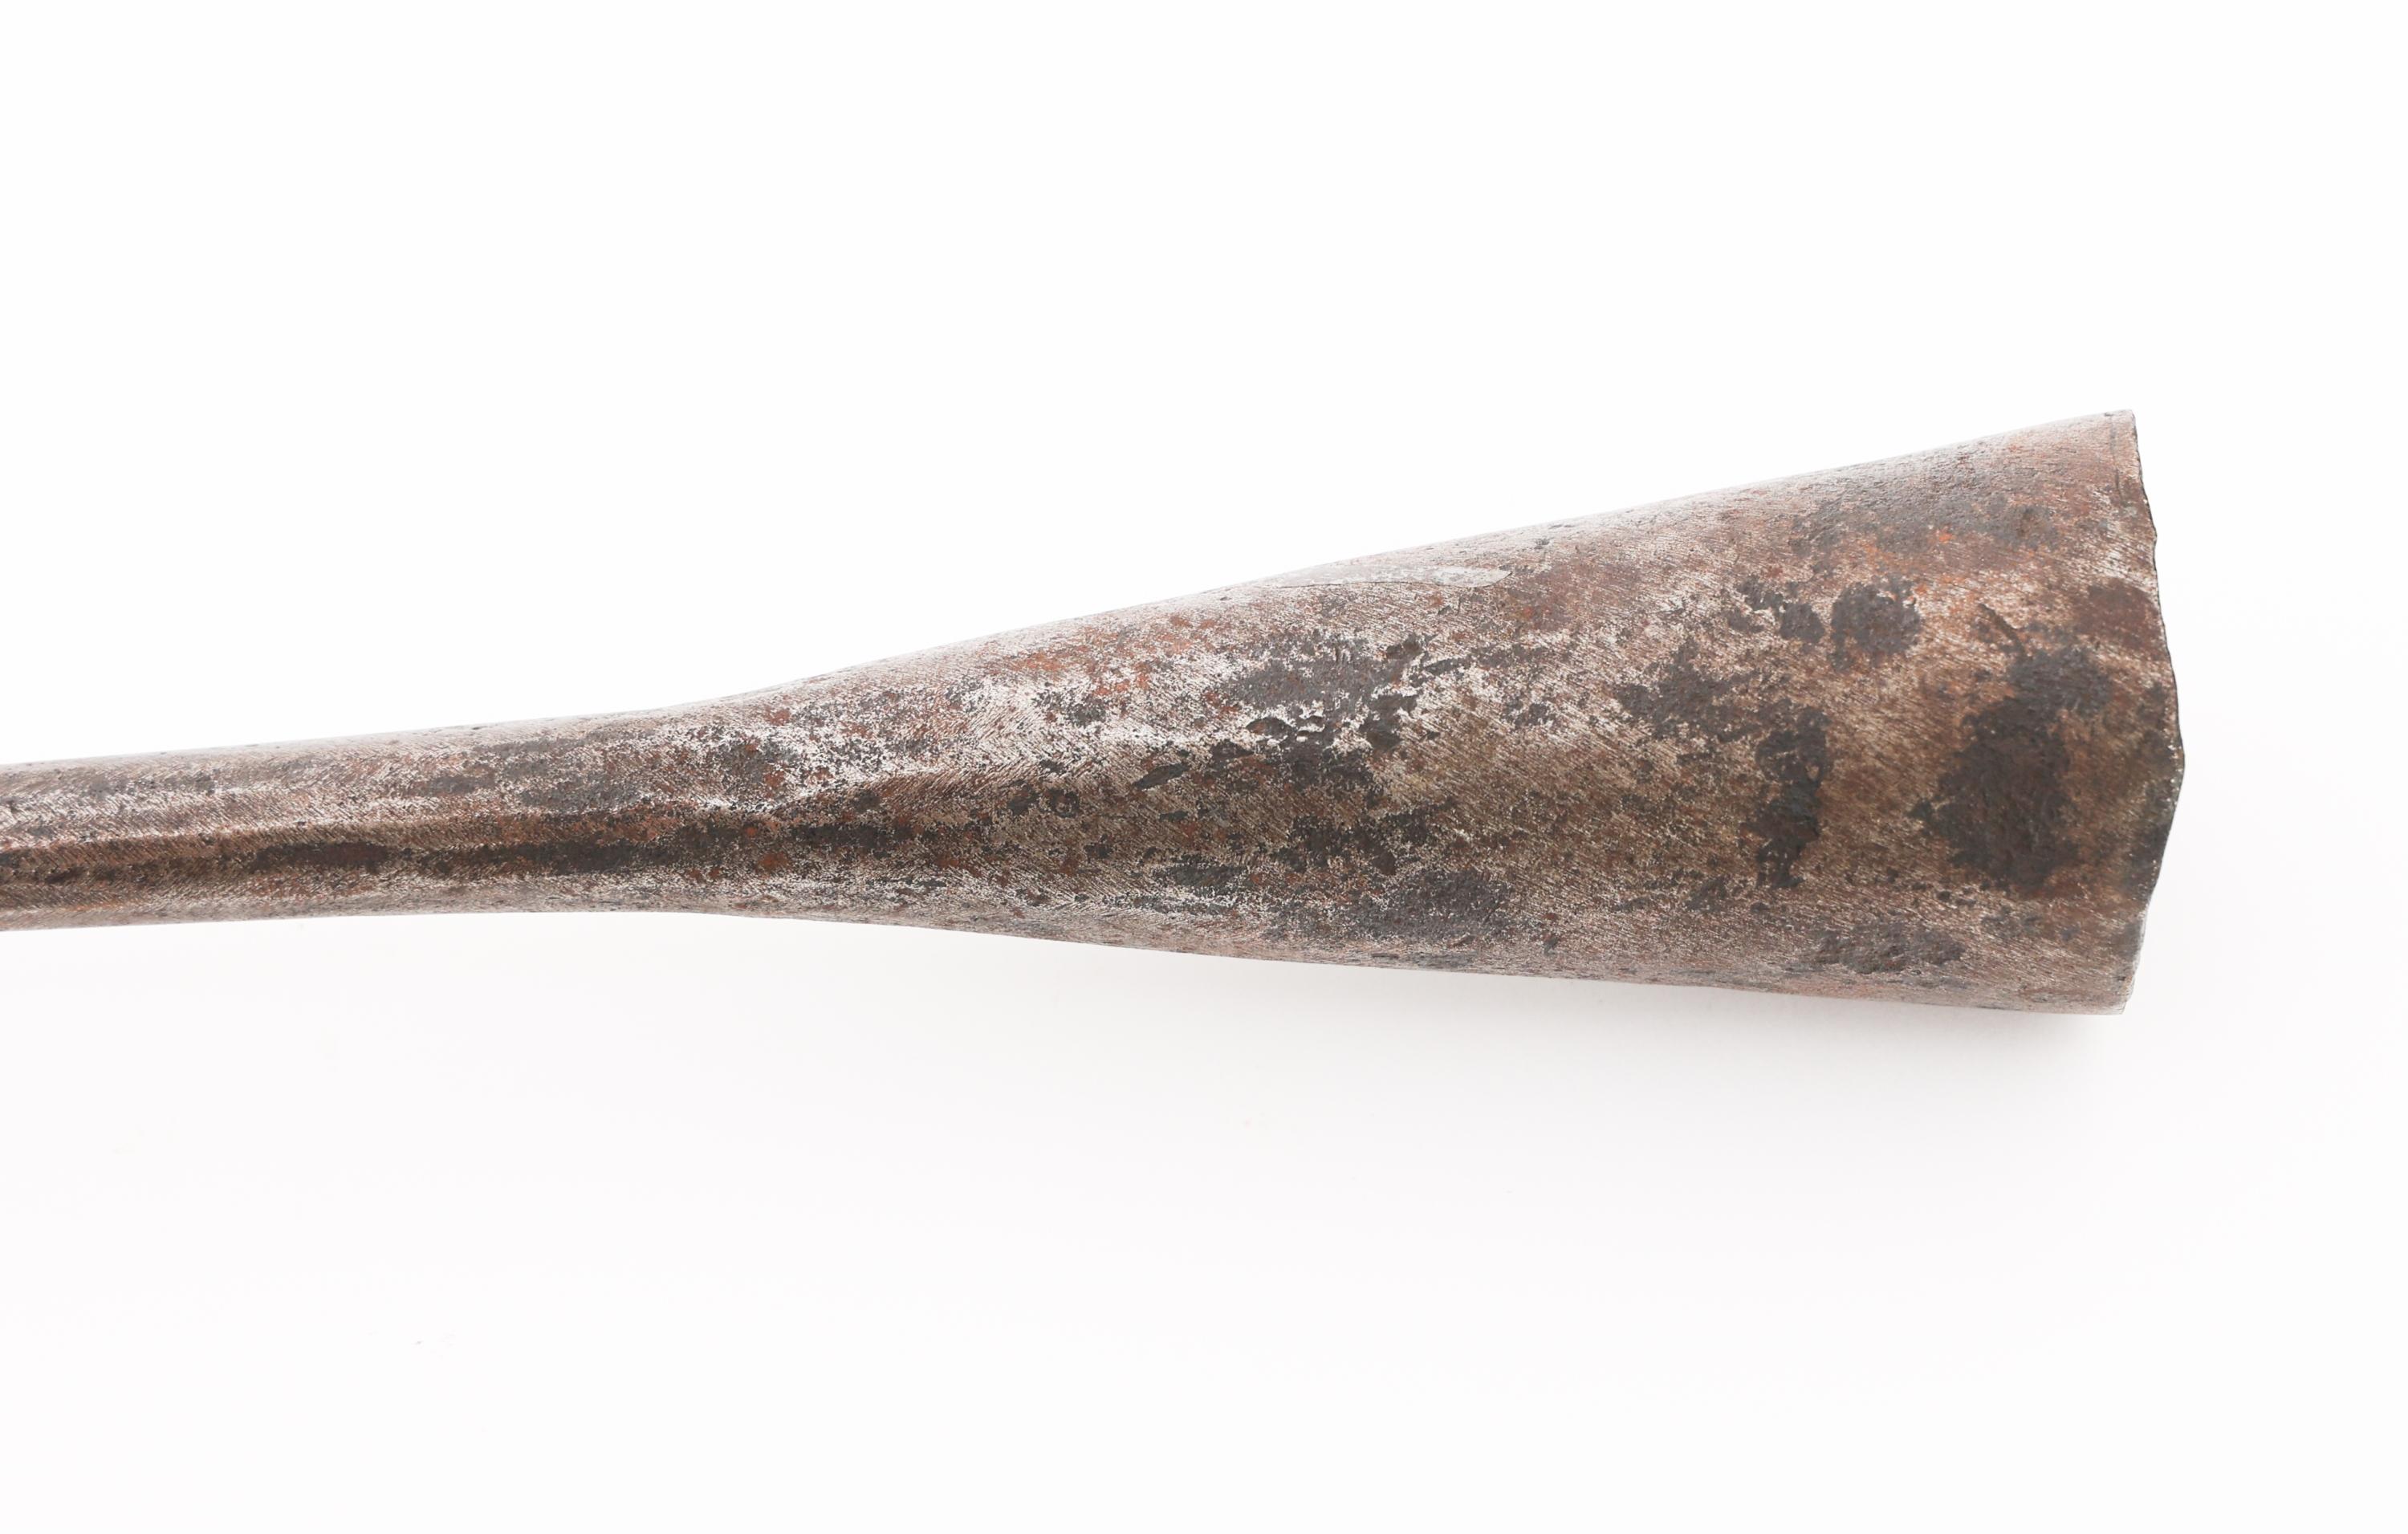 EARLY 20th C. WHALING LANCE HEAD